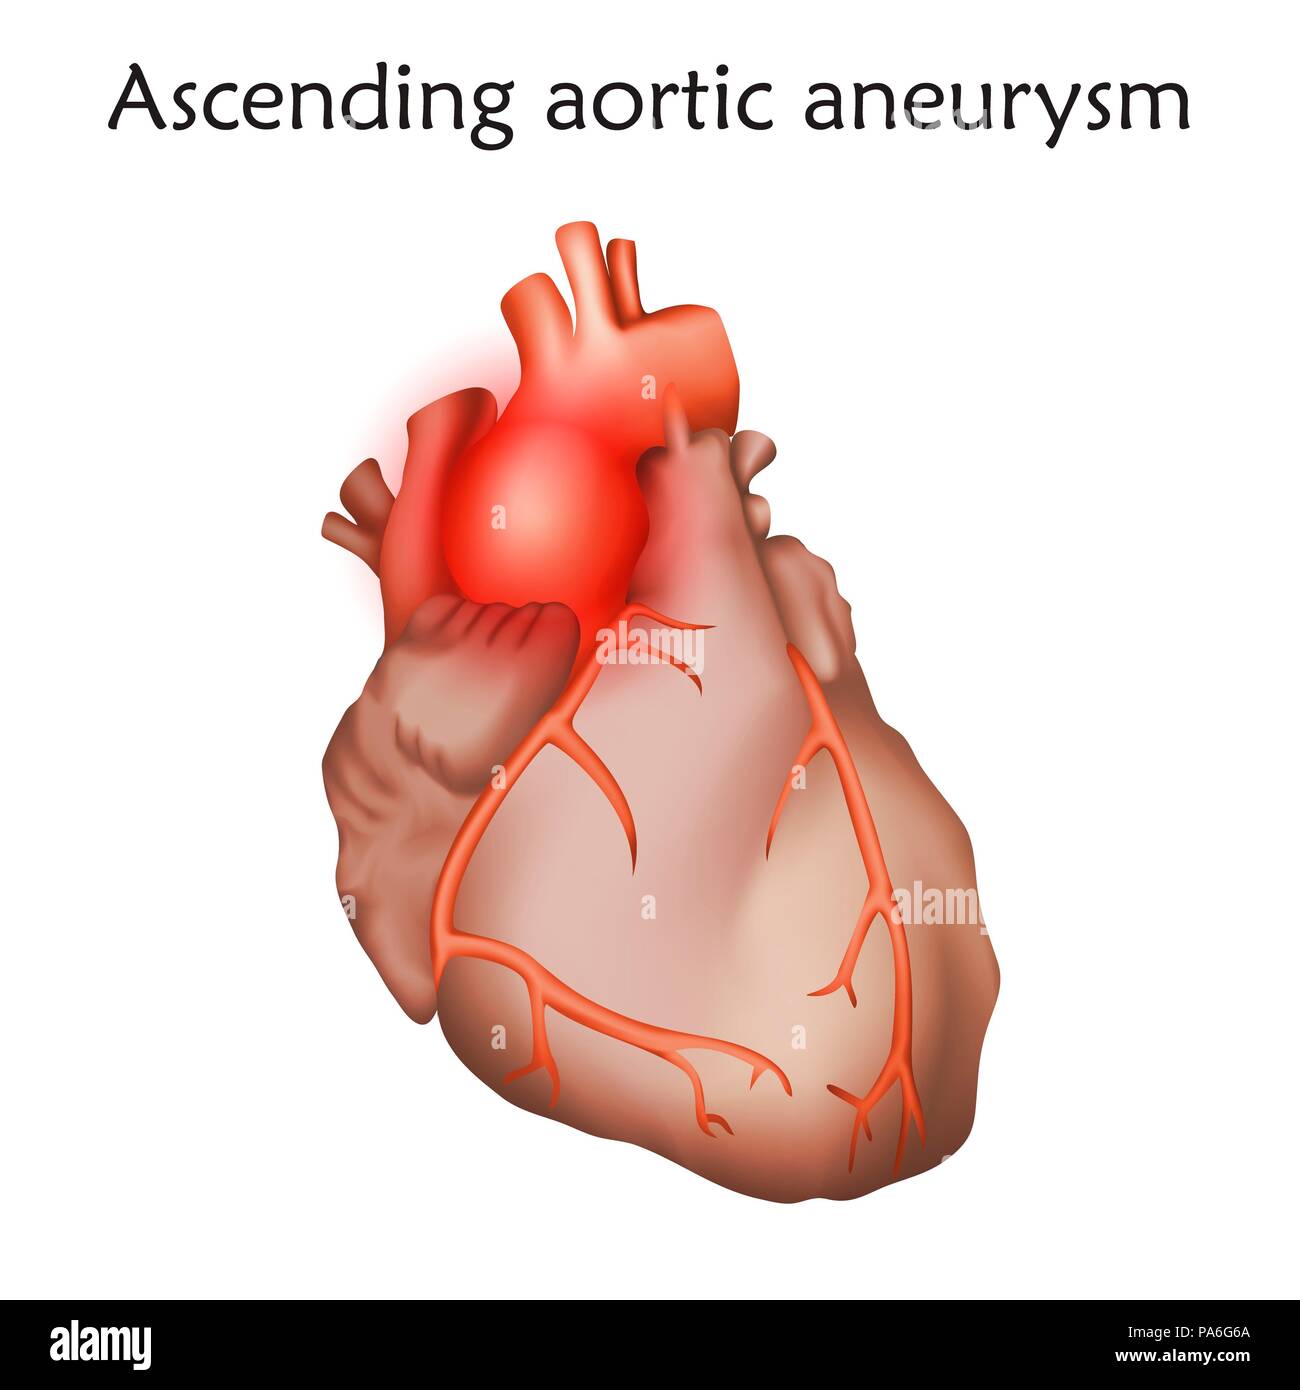 Ascending aortic aneurysm, illustration. Enlargement of a weakened area in the ascending aorta. Stock Photo